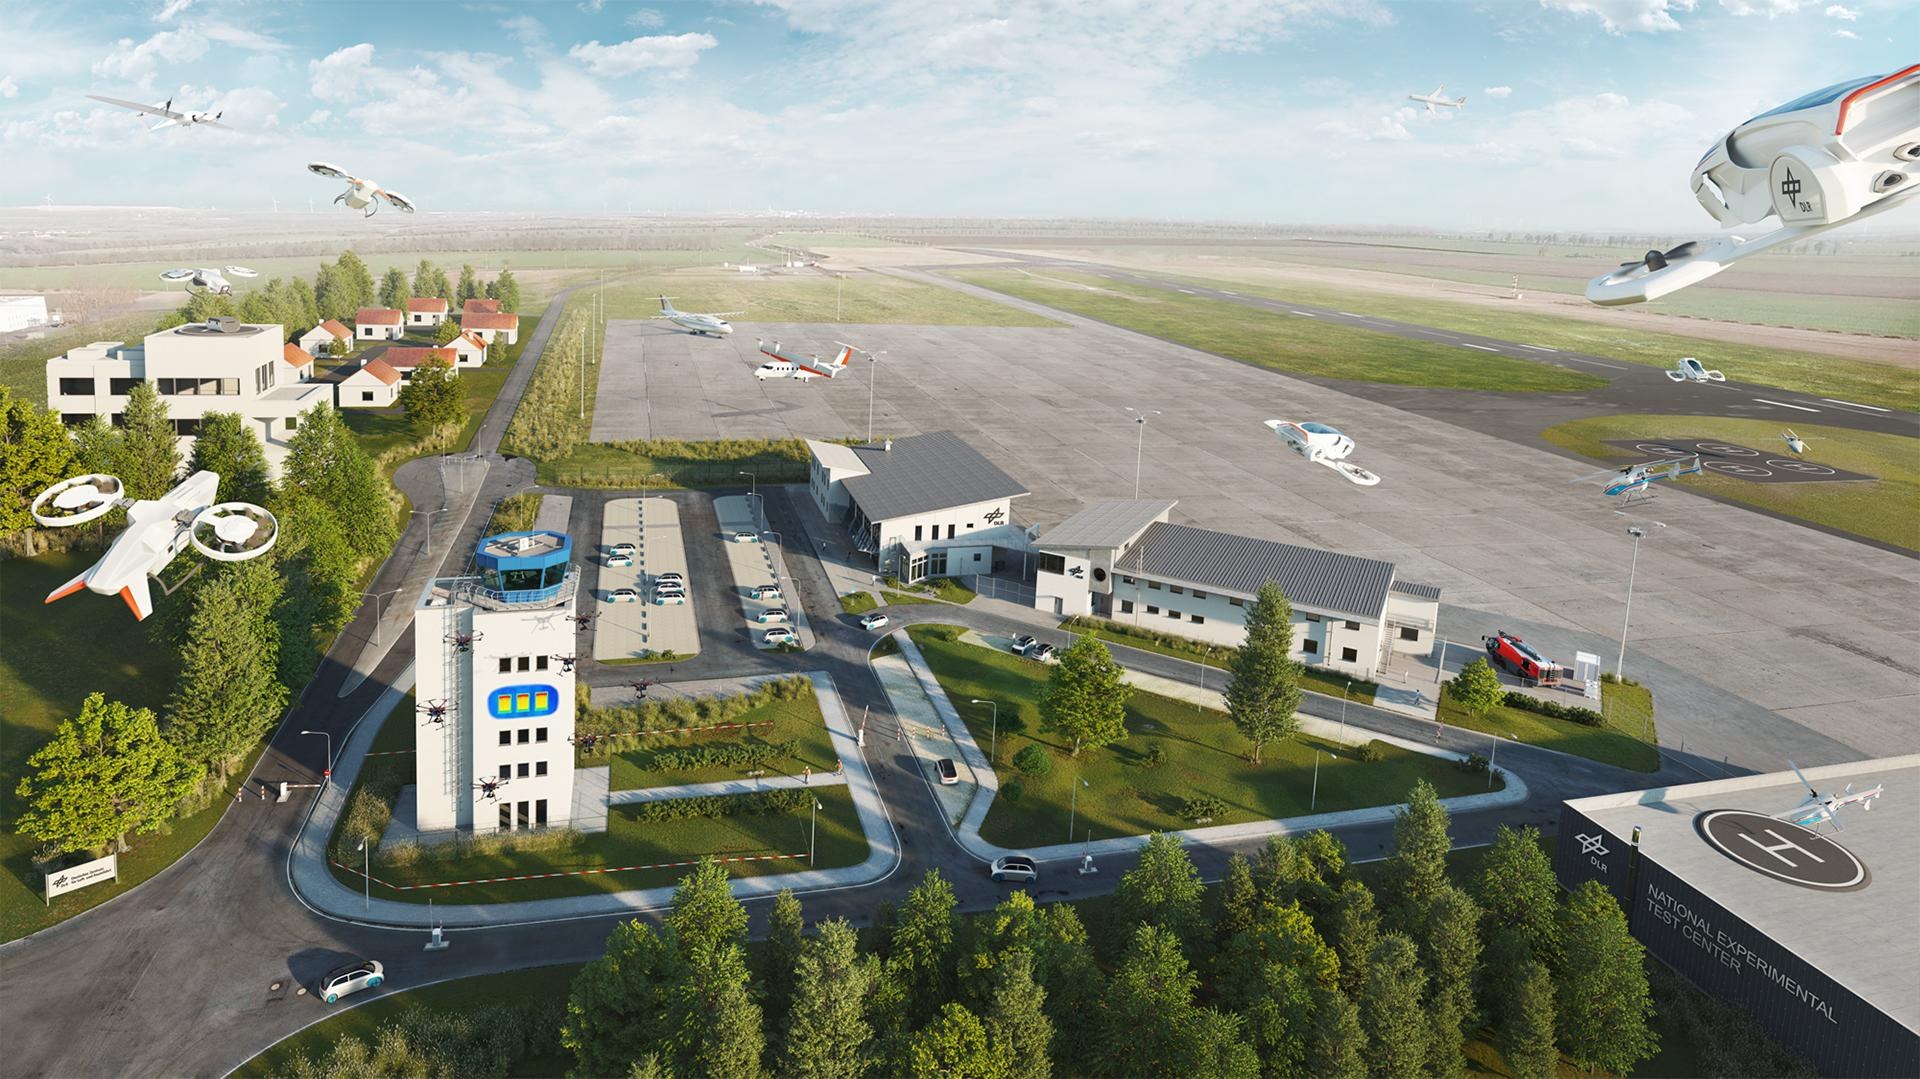 Future vision of the National Test Centre at DLR's Cochstedt site